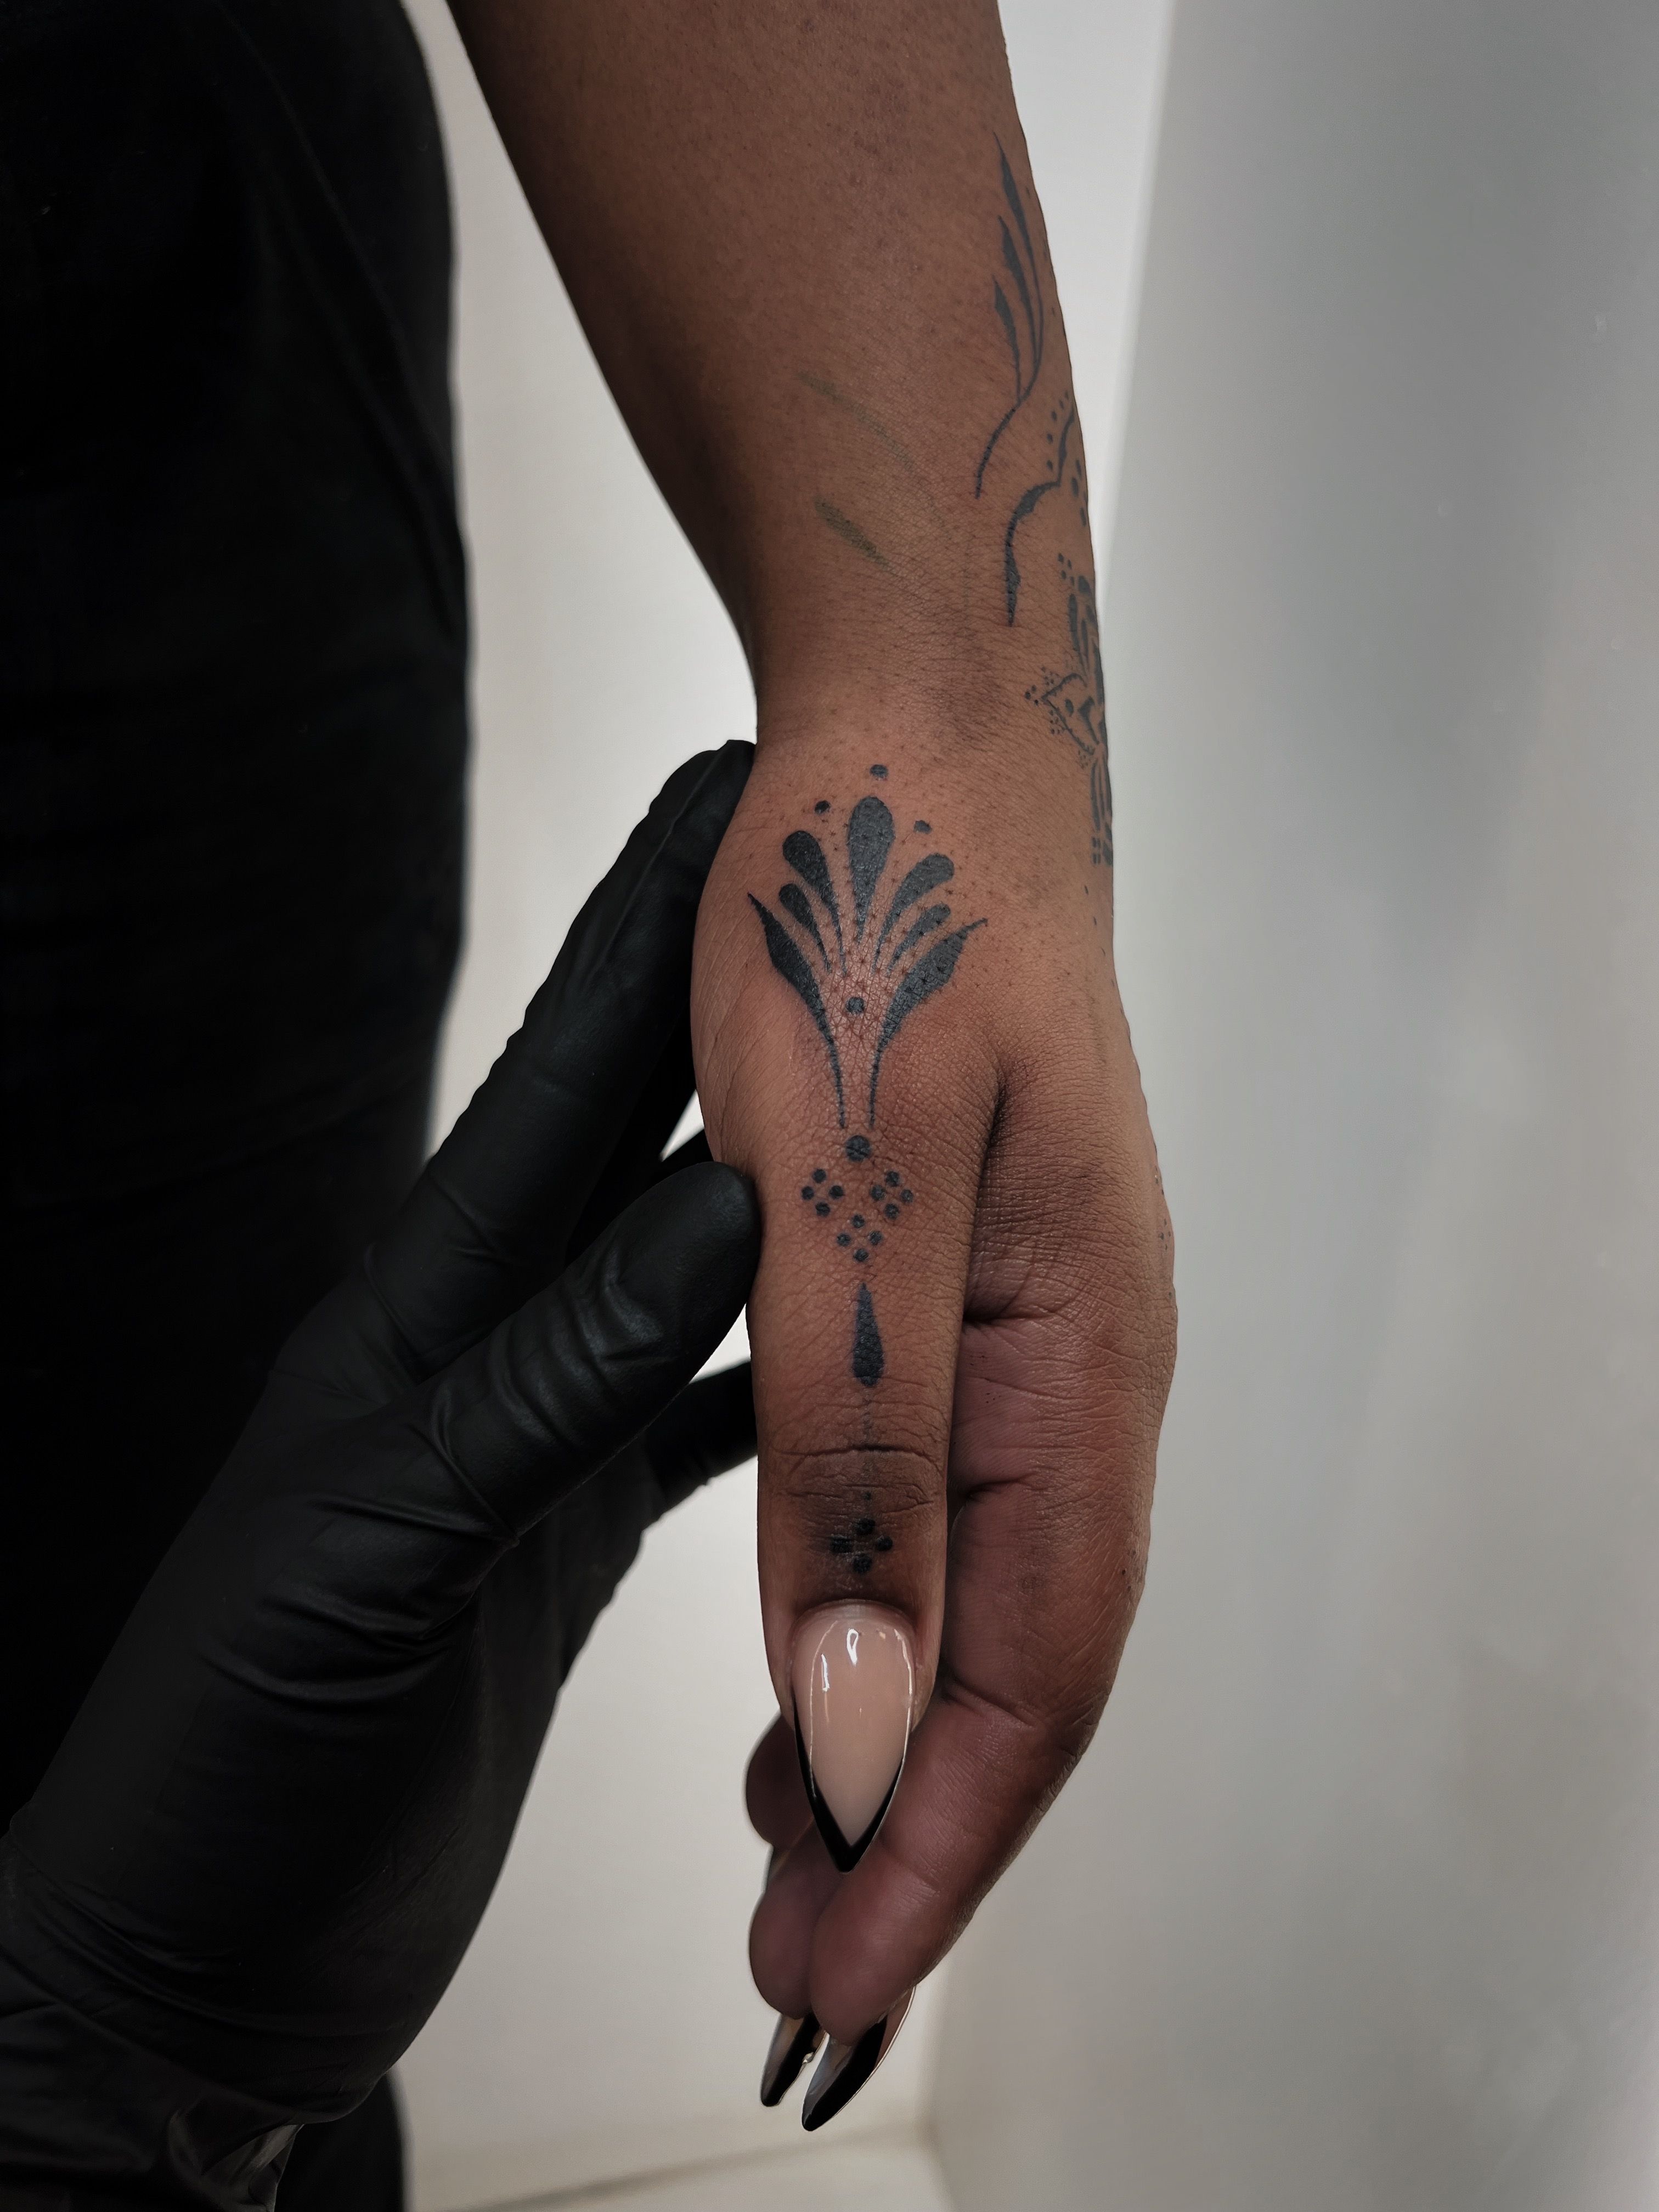 Minimalistic style crown tattoo done on the finger.